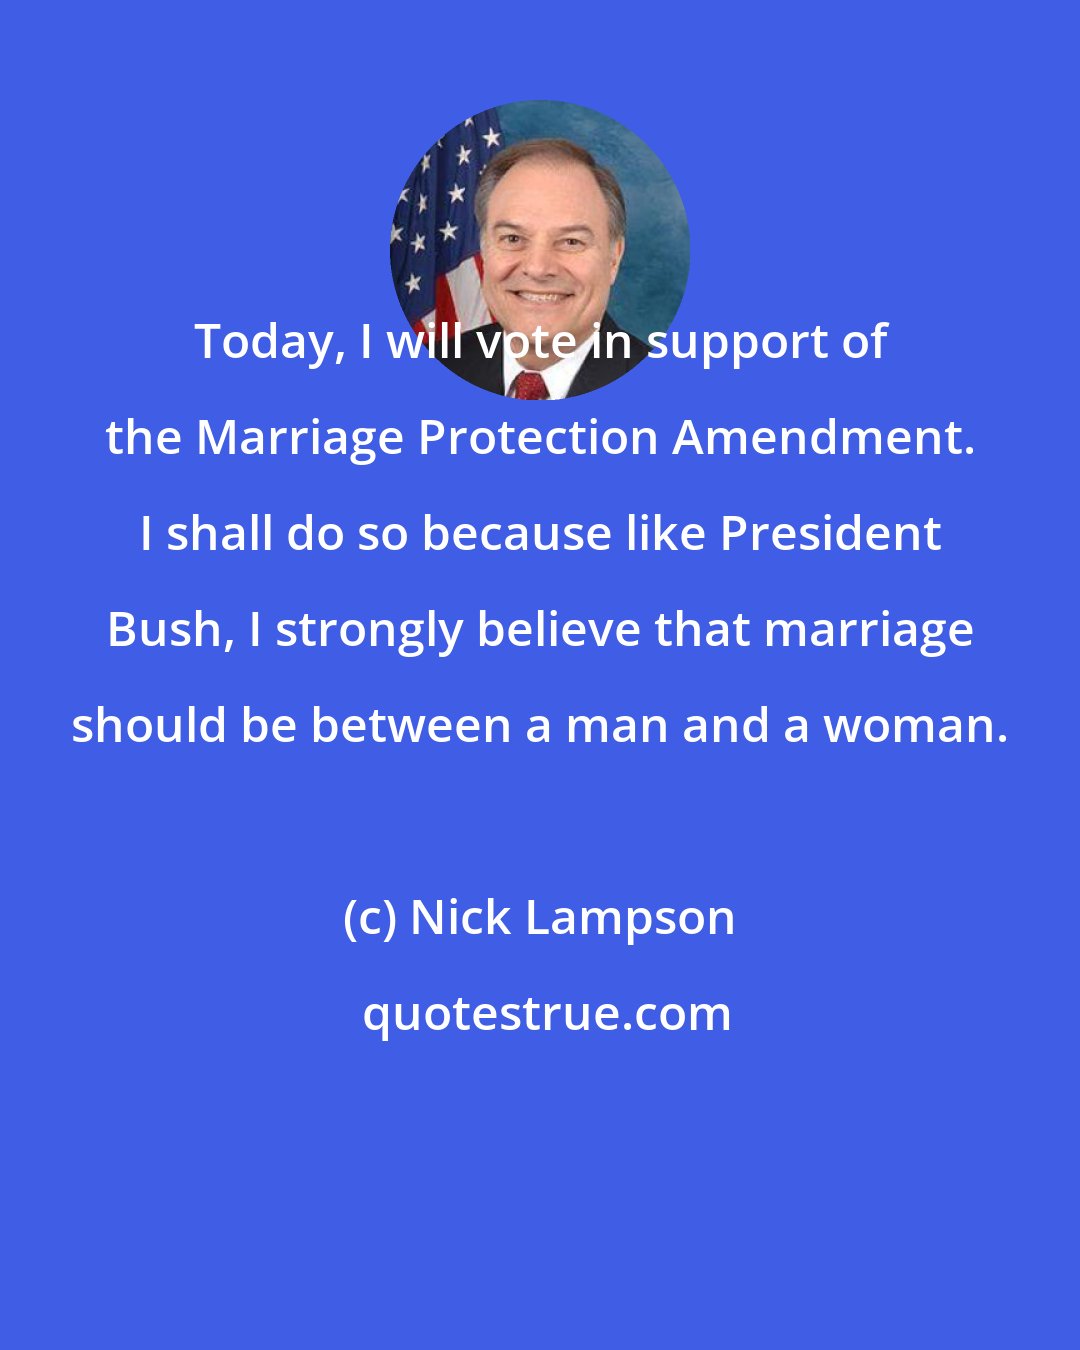 Nick Lampson: Today, I will vote in support of the Marriage Protection Amendment. I shall do so because like President Bush, I strongly believe that marriage should be between a man and a woman.